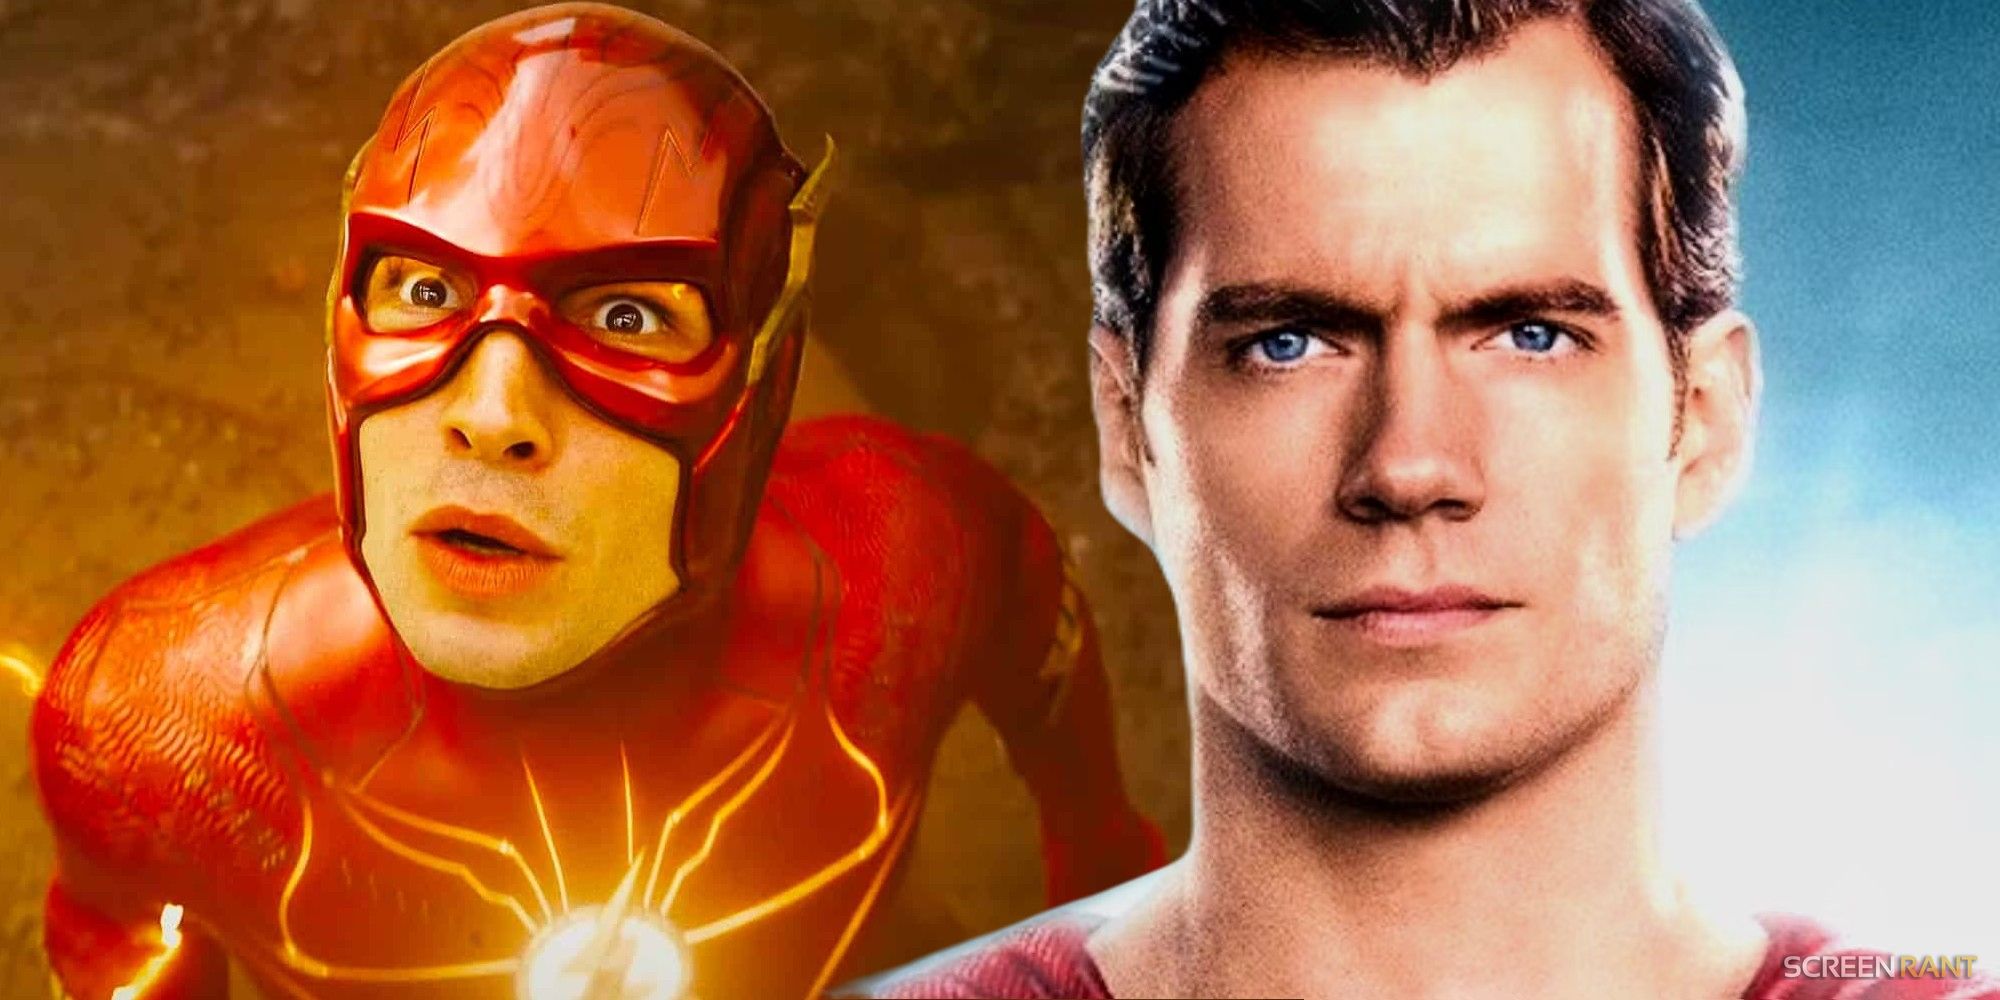 Custom image of Henry Cavill's Superman and Ezra Miller's The Flash side by side.